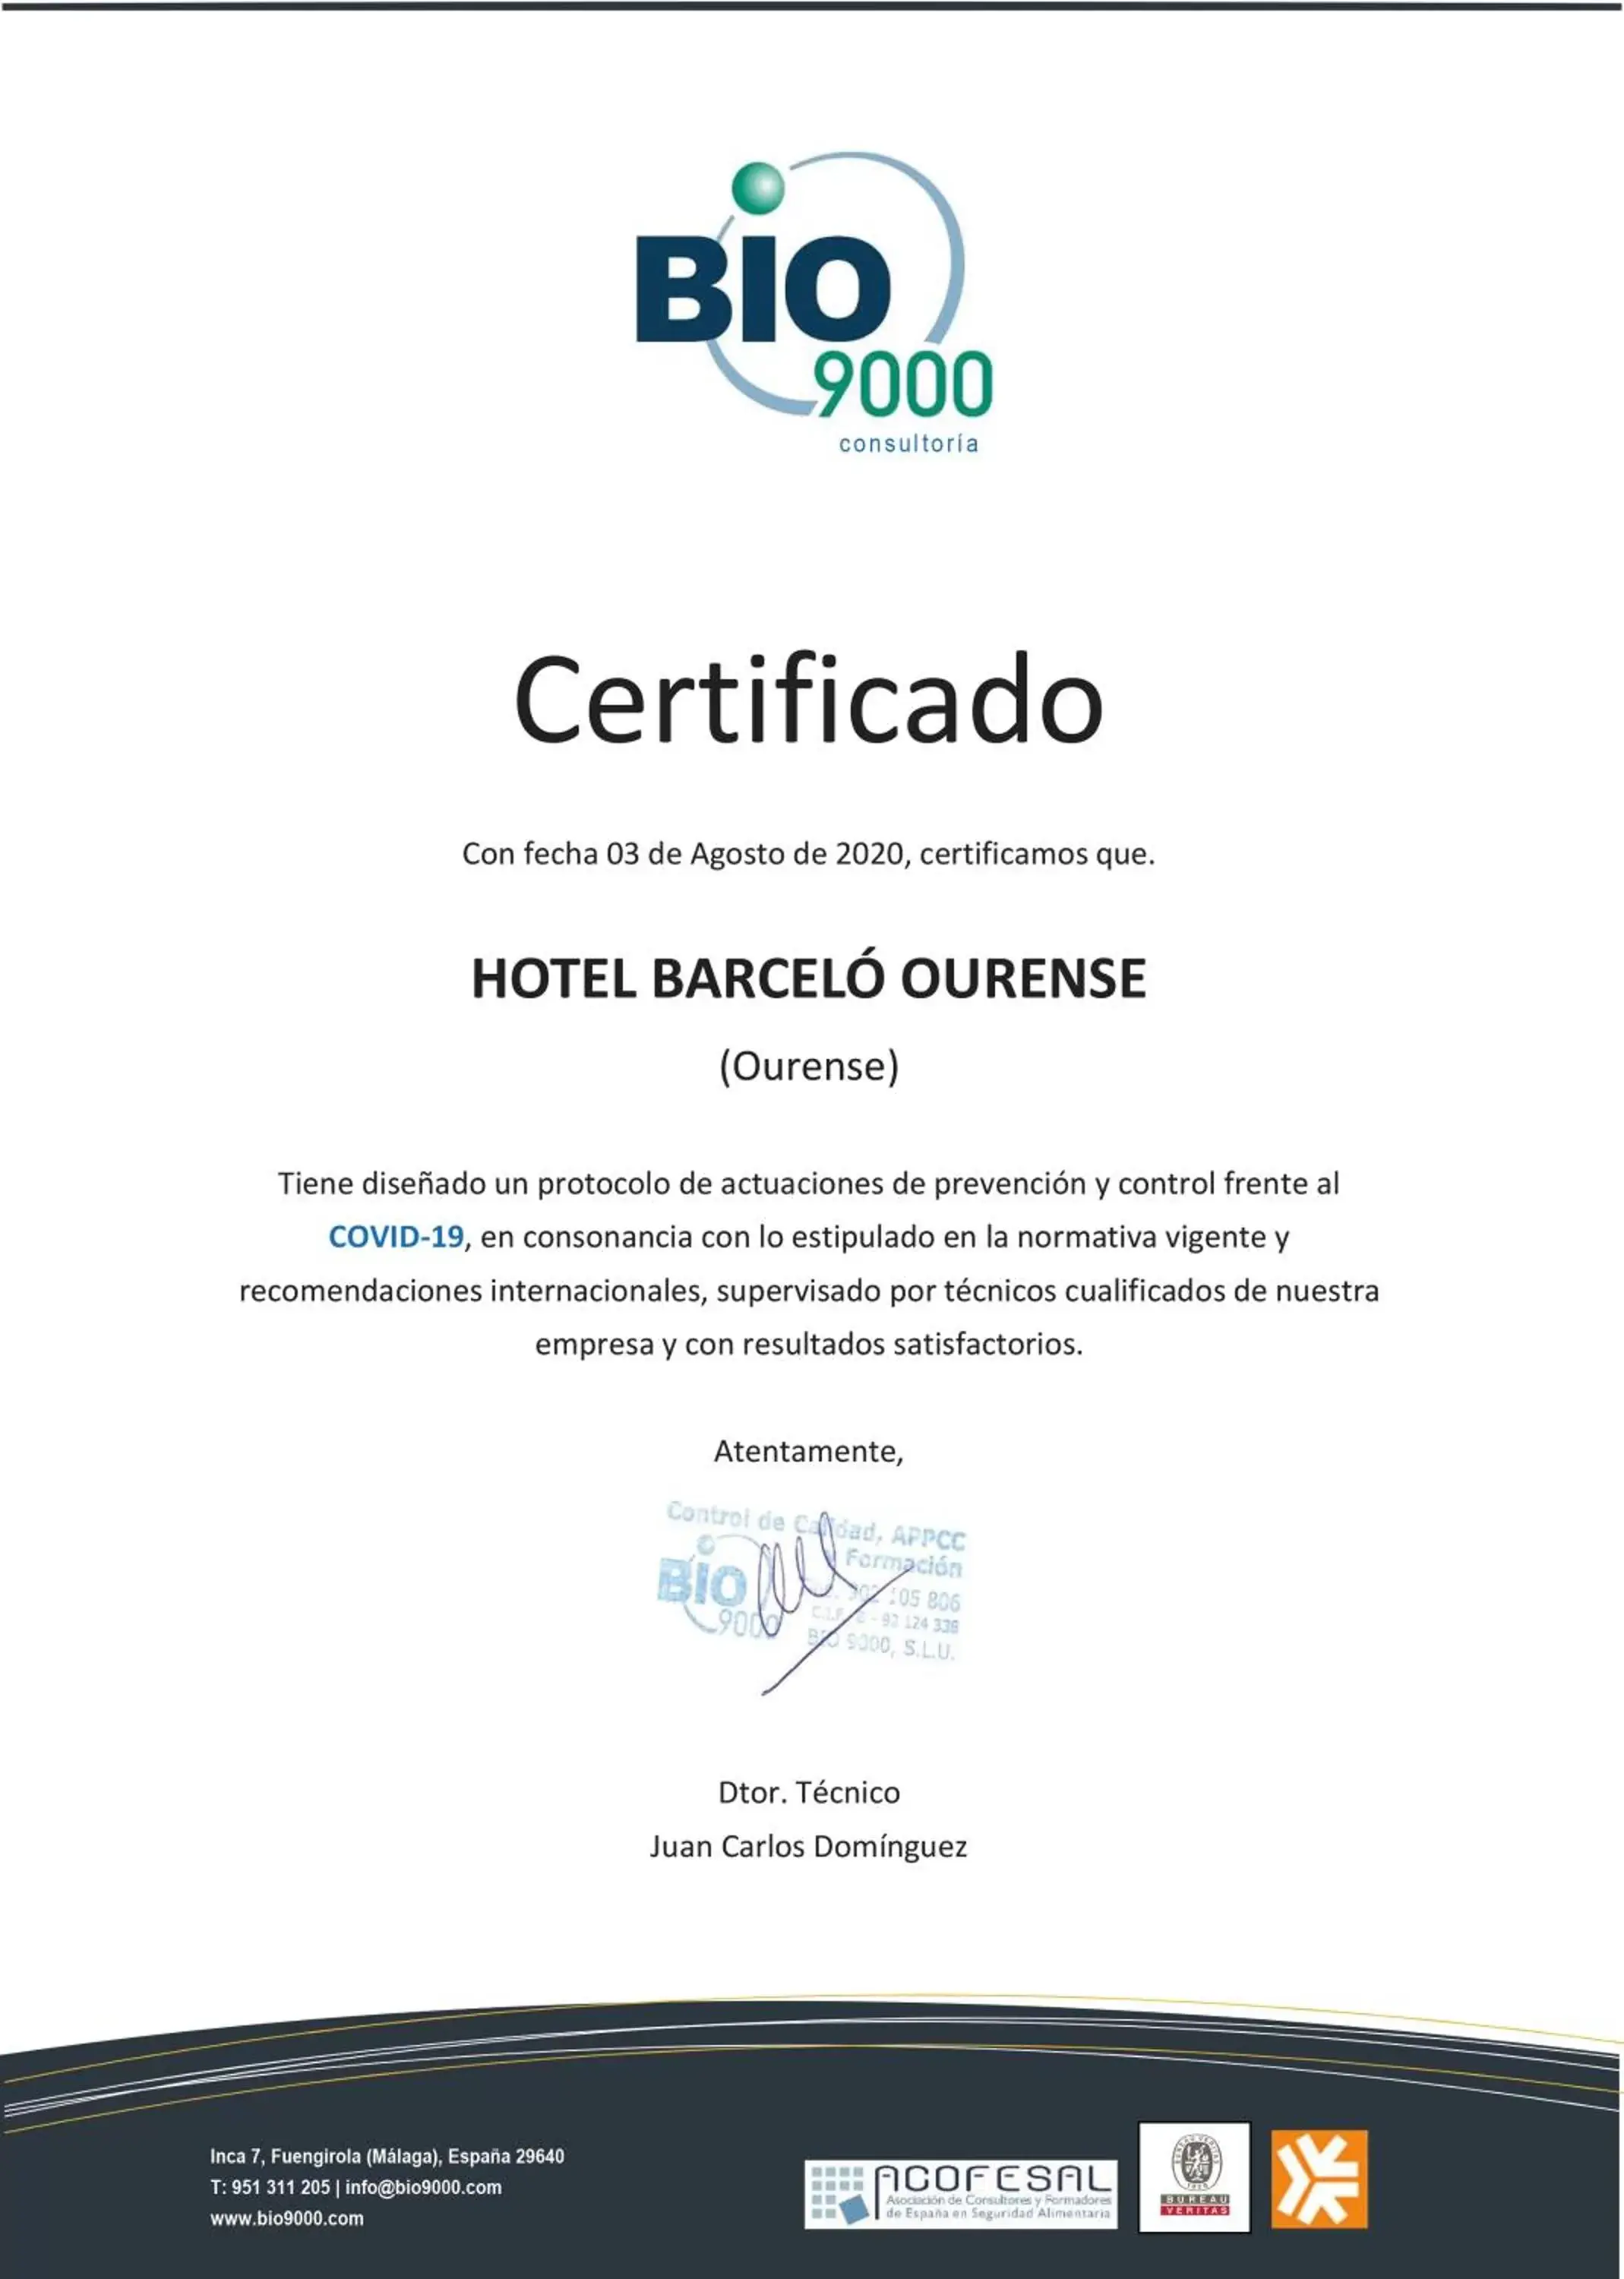 Certificate/Award in Barceló Ourense